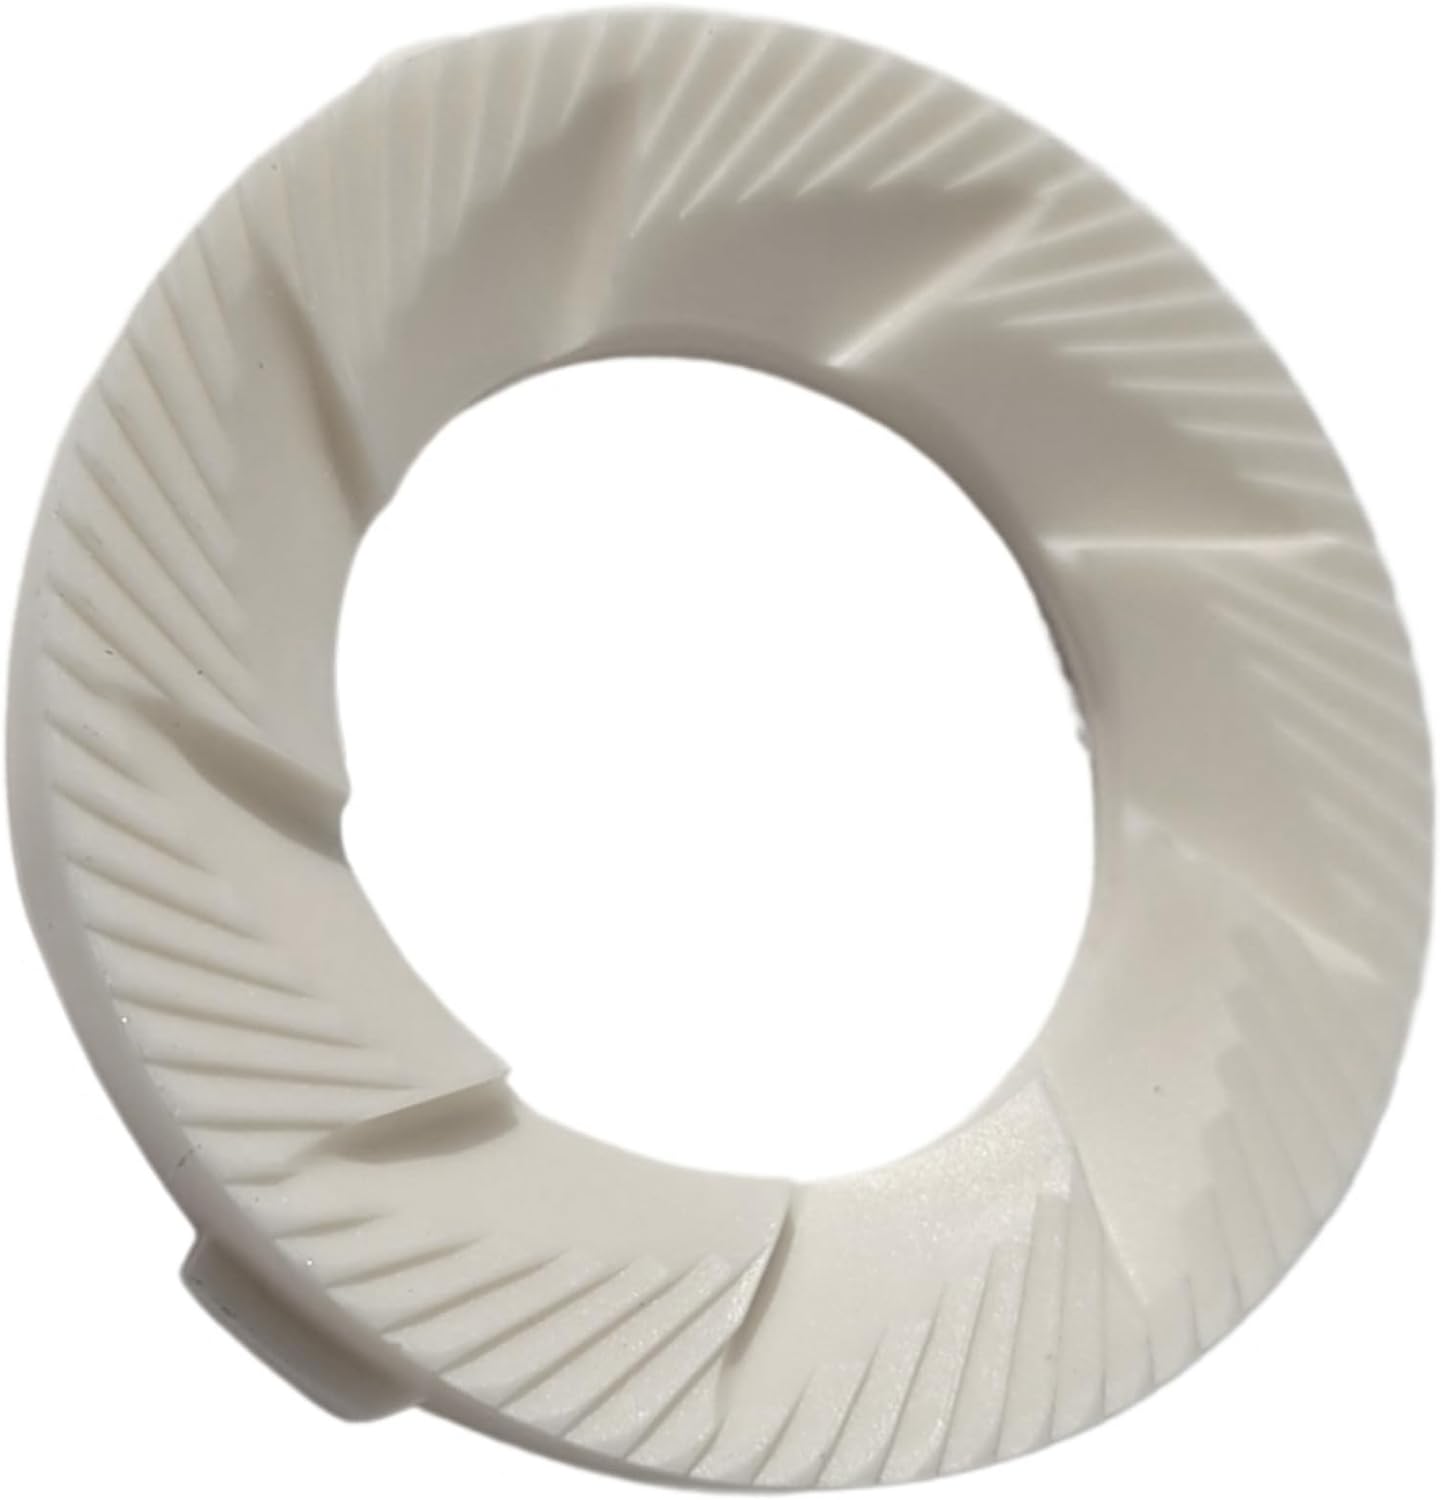 EP Series Ceramic Grinding Ring for Philips Saeco Lattego Latte Go Series Coffee Machines